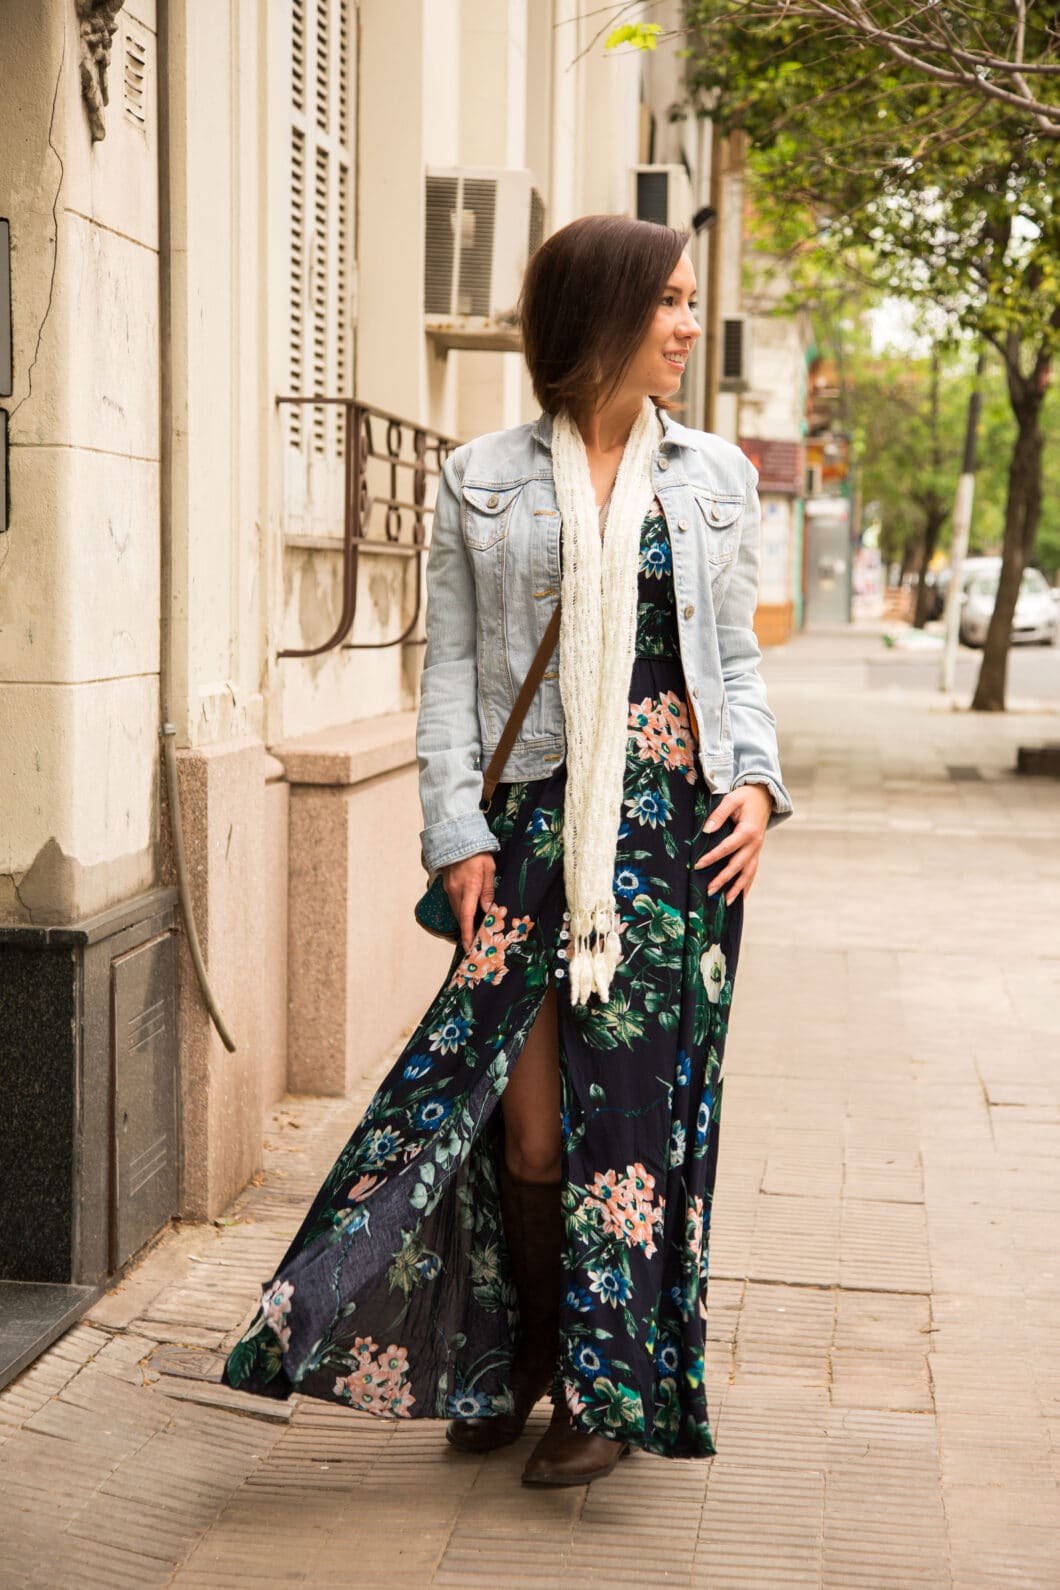 Styling a Floral Maxi Dress for Fall